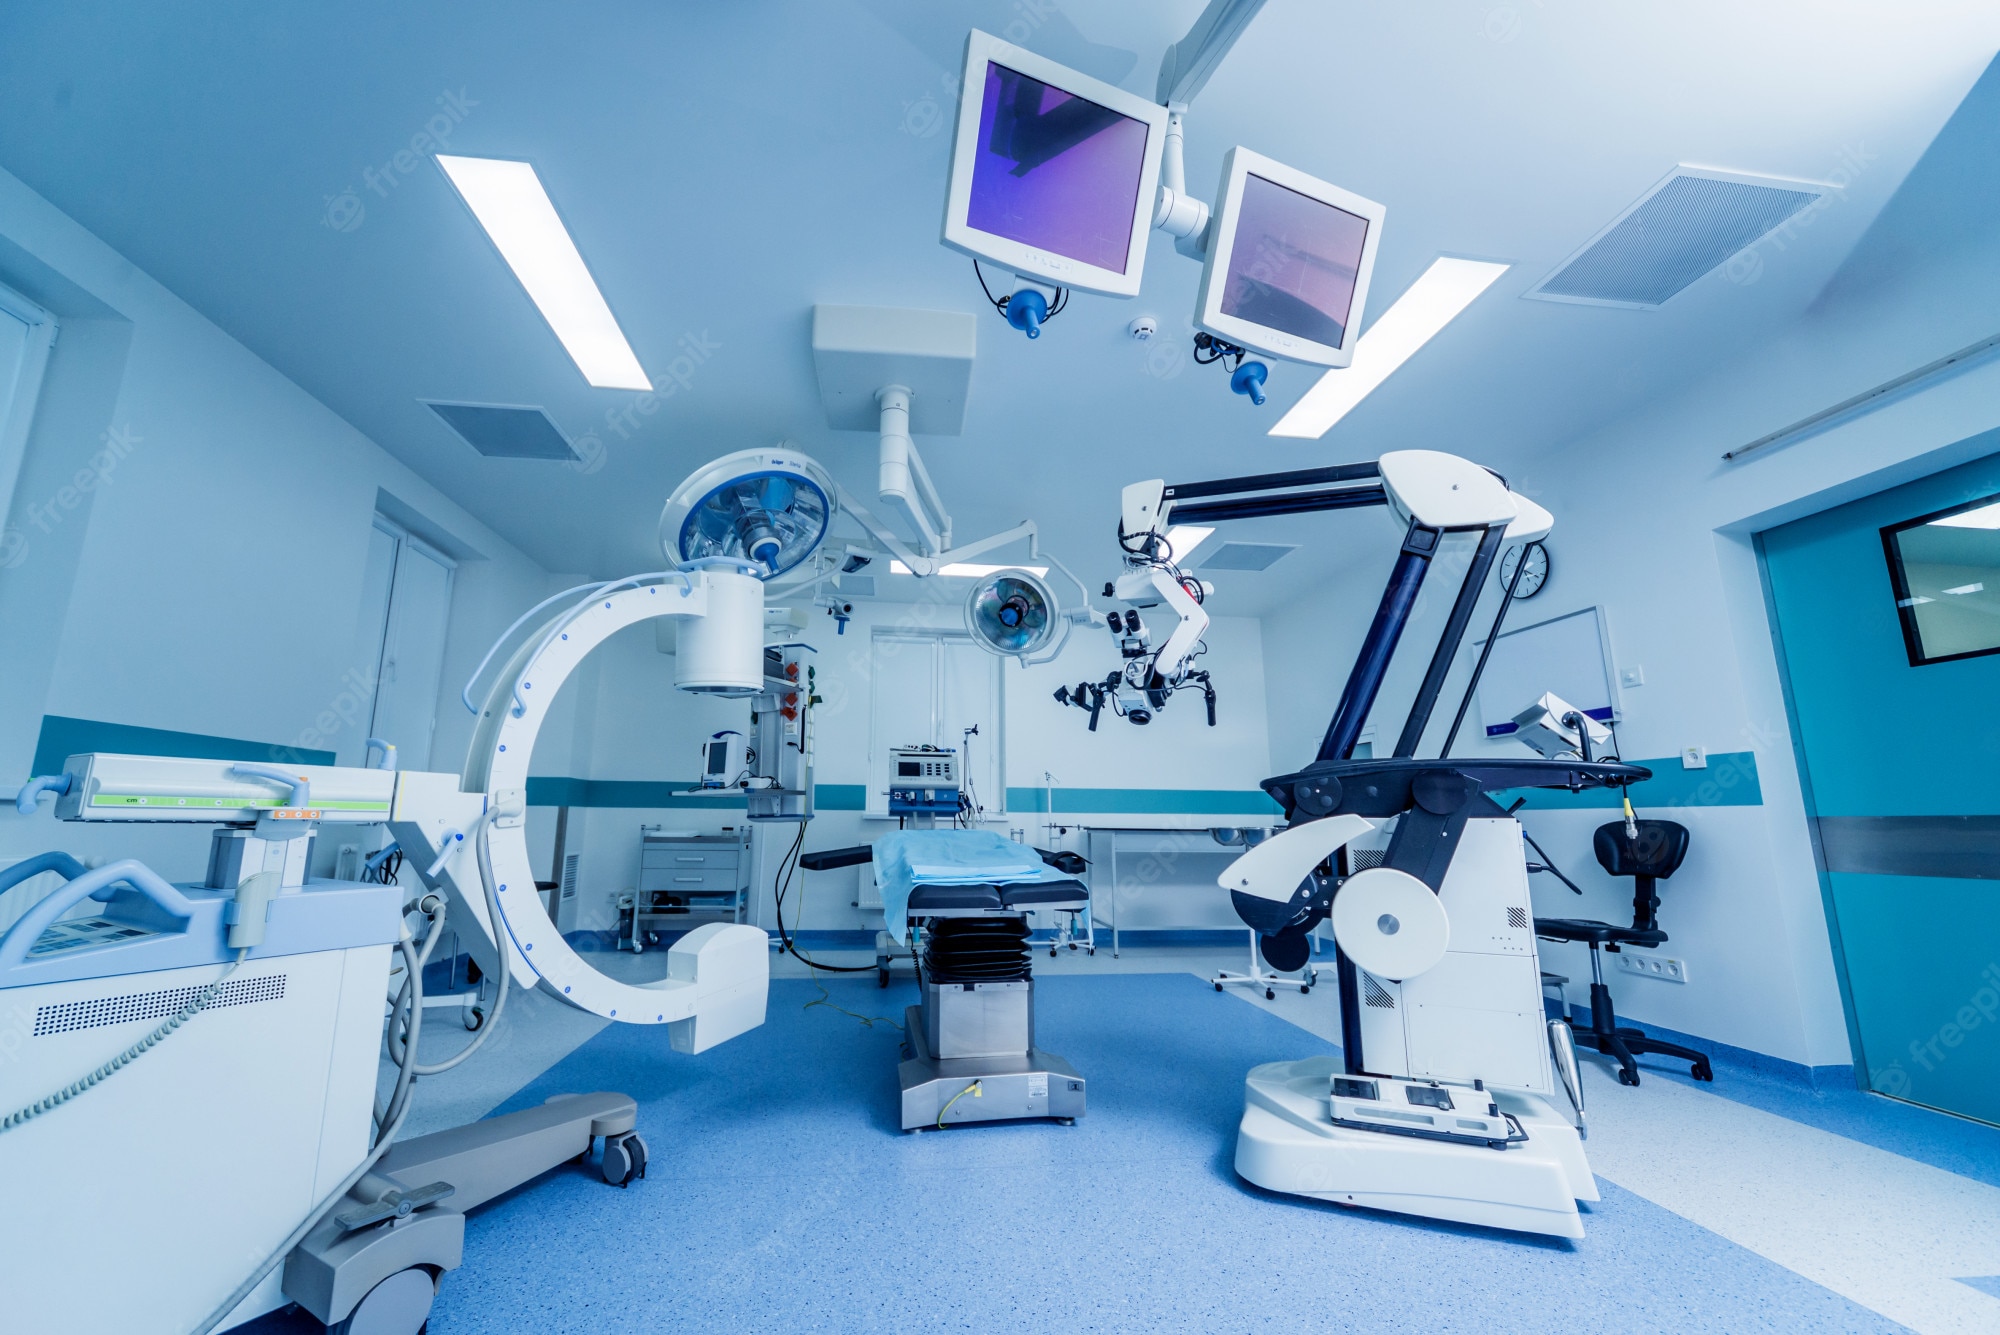 modern-equipment-operating-room-medical-devices-neurosurgery_179755-5289